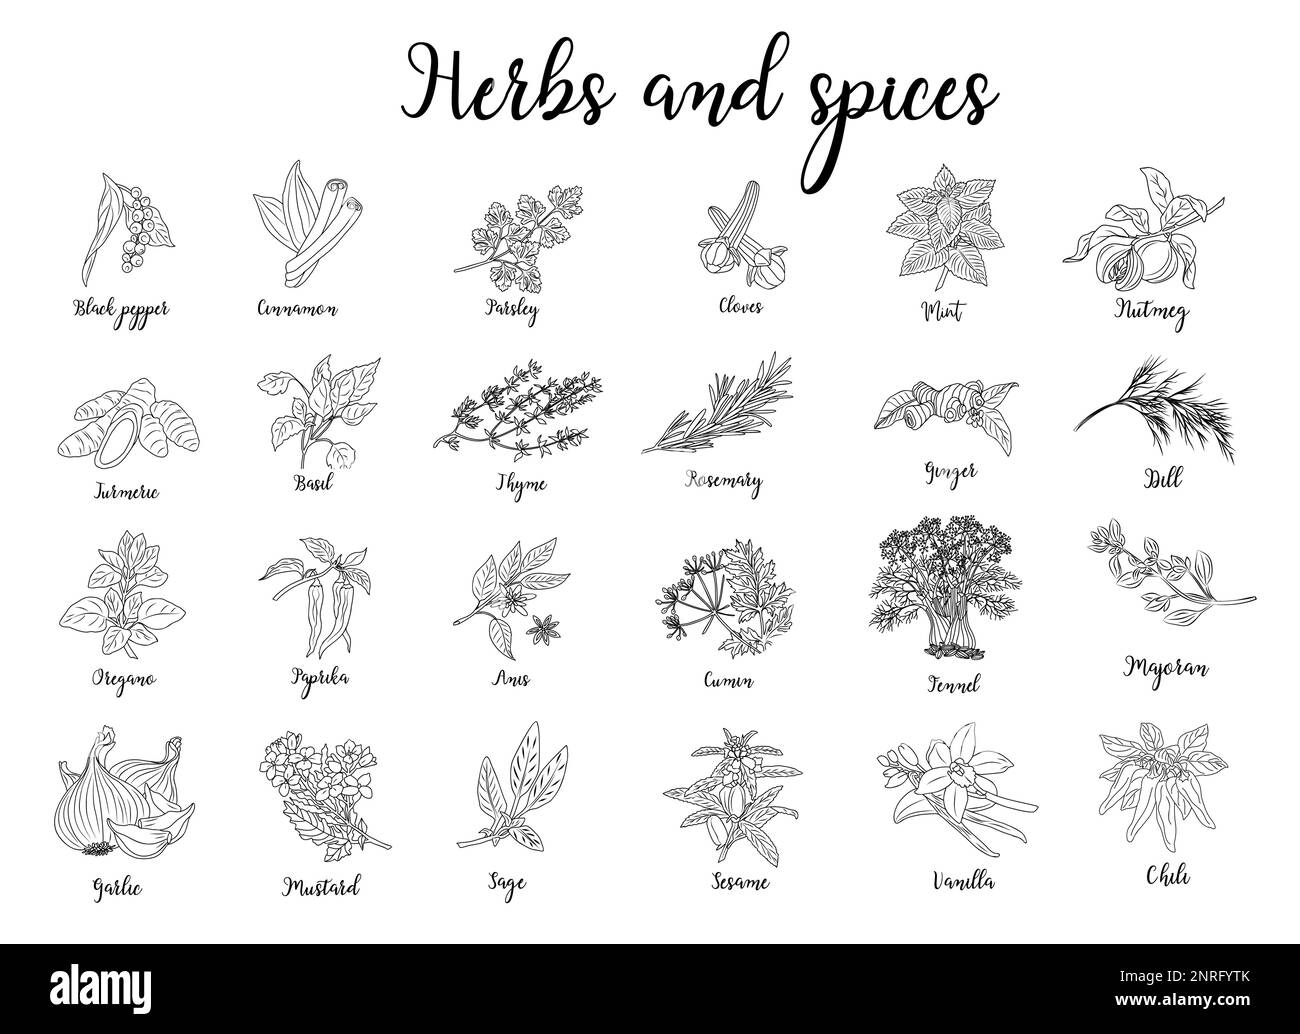 Herbs and spices hand drawn vector illustration. Stock Vector